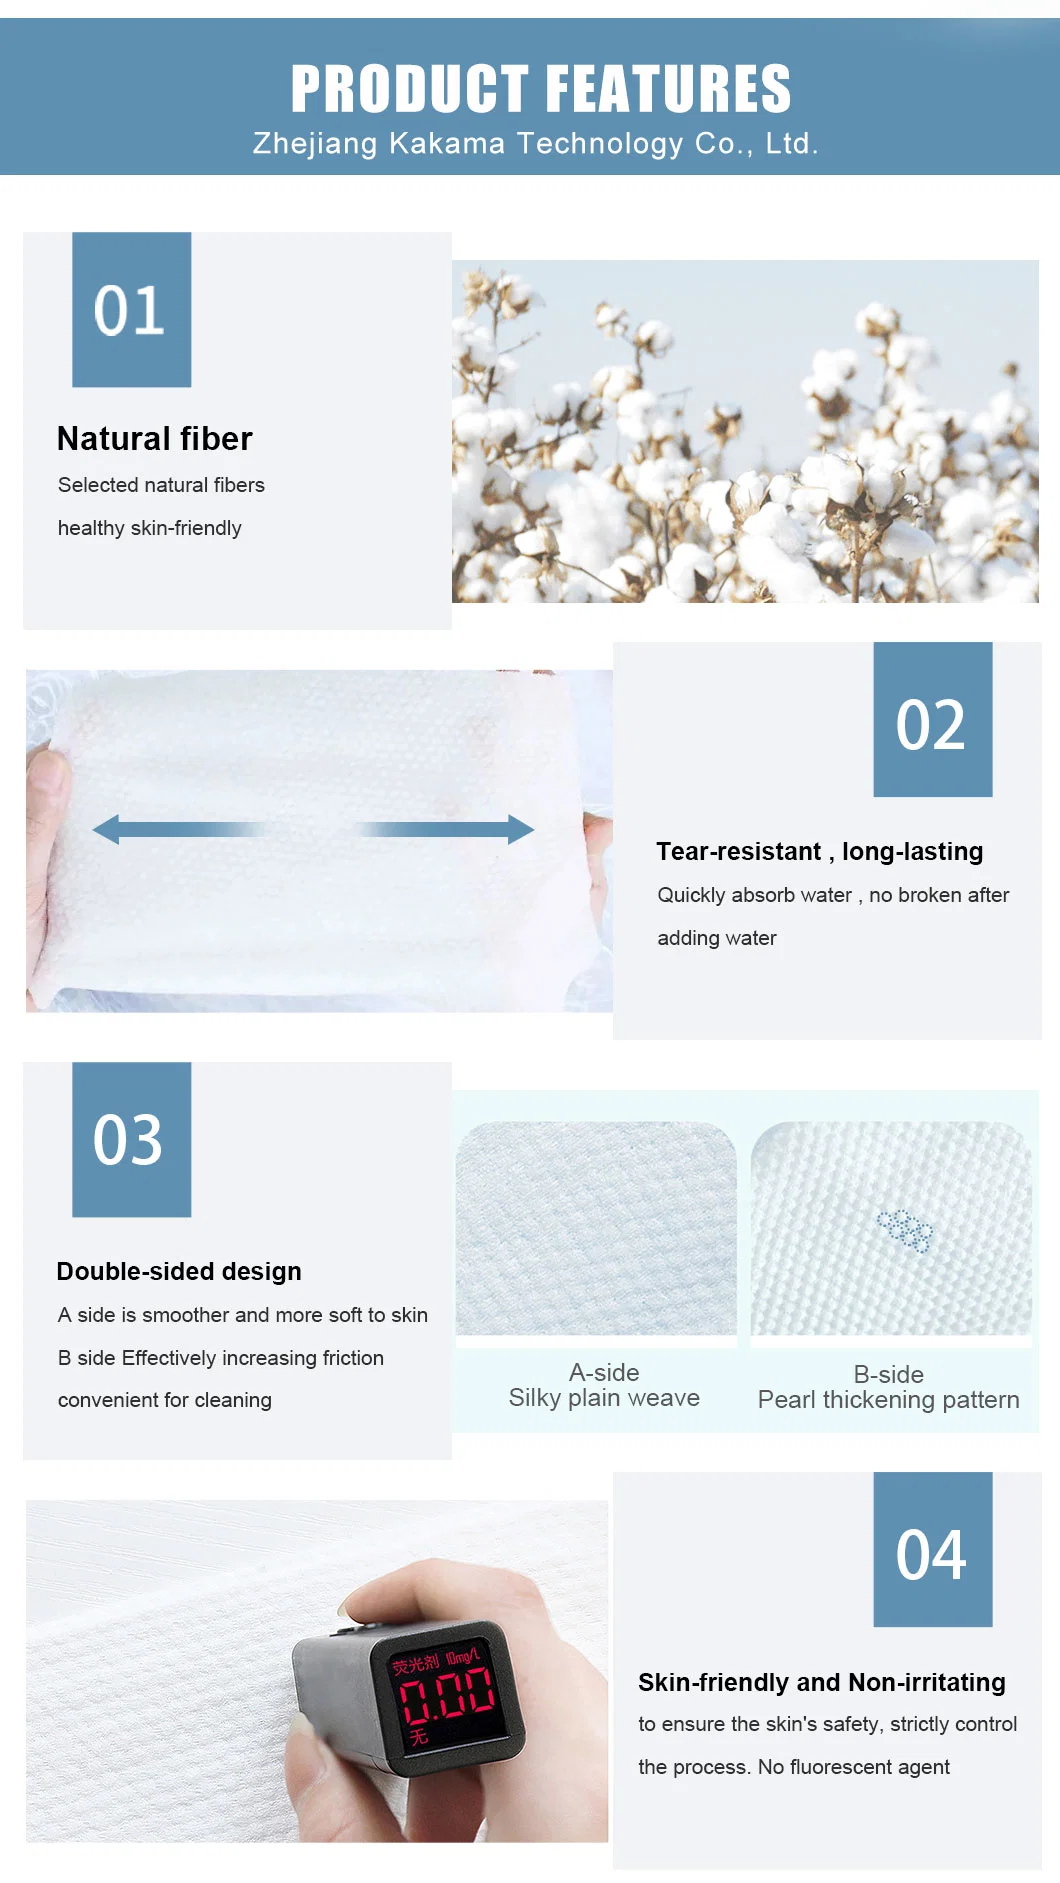 Dry and Wet Dual Use Custom 100% Soft Cotton Towel Dry Facial Wipes Disposable Face Towel